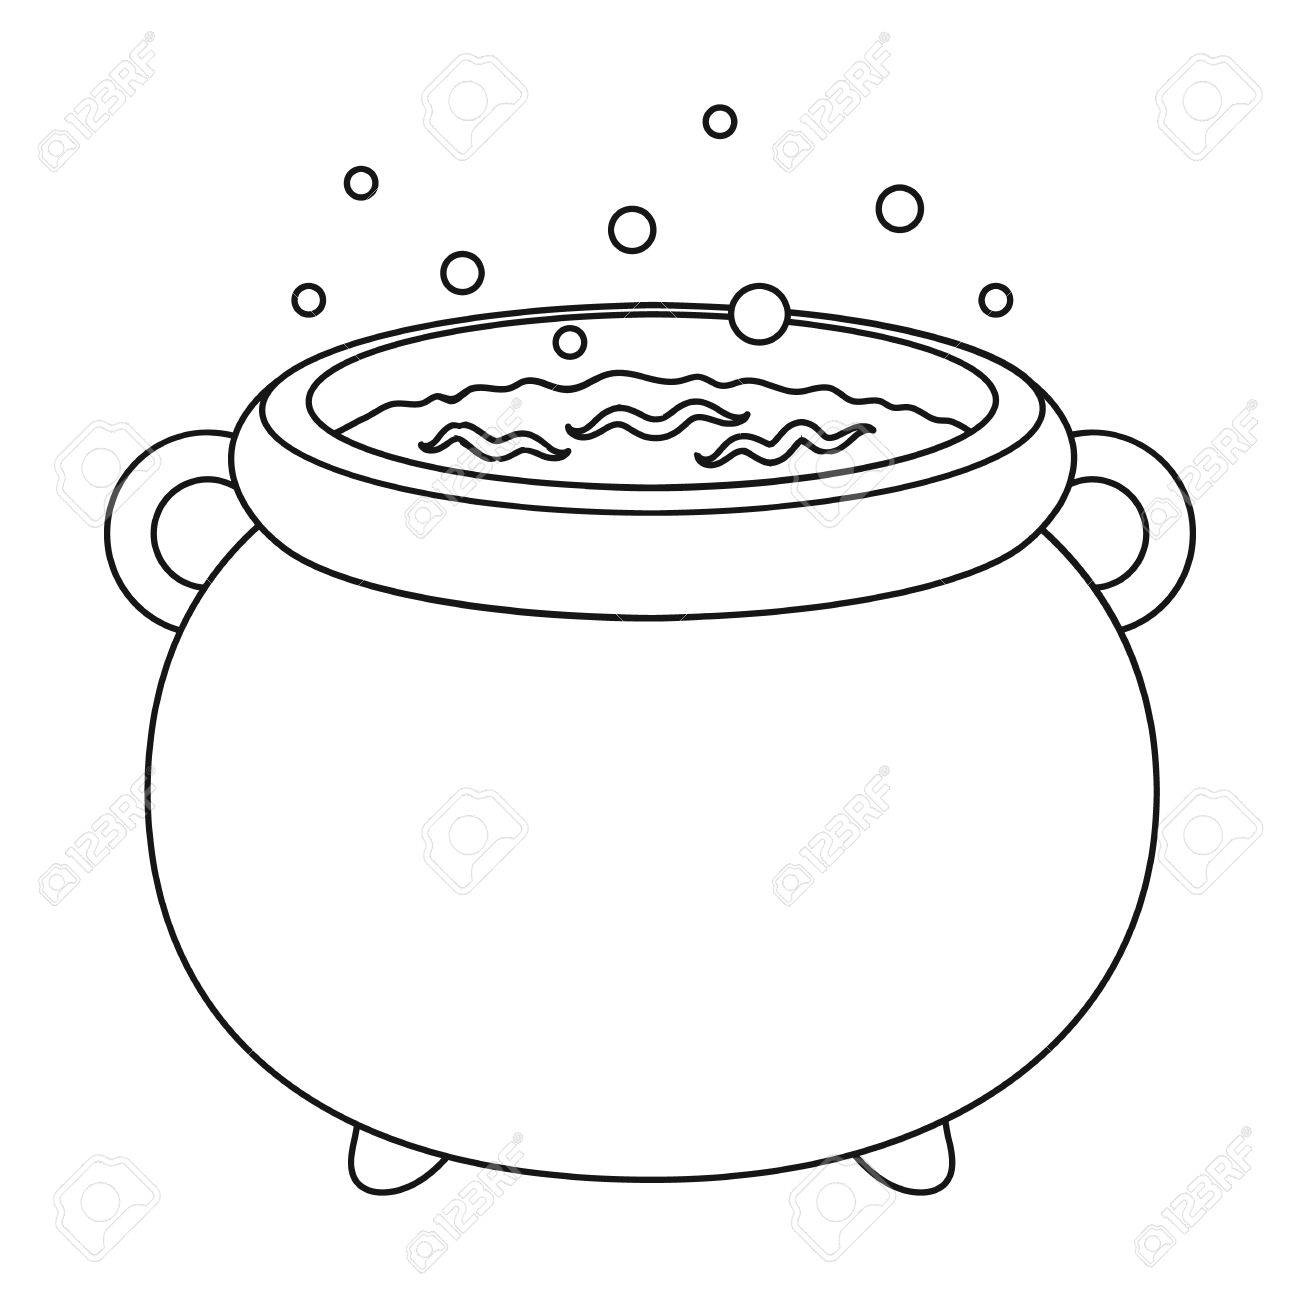 cauldron clipart black and white 20 free Cliparts | Download images on ...